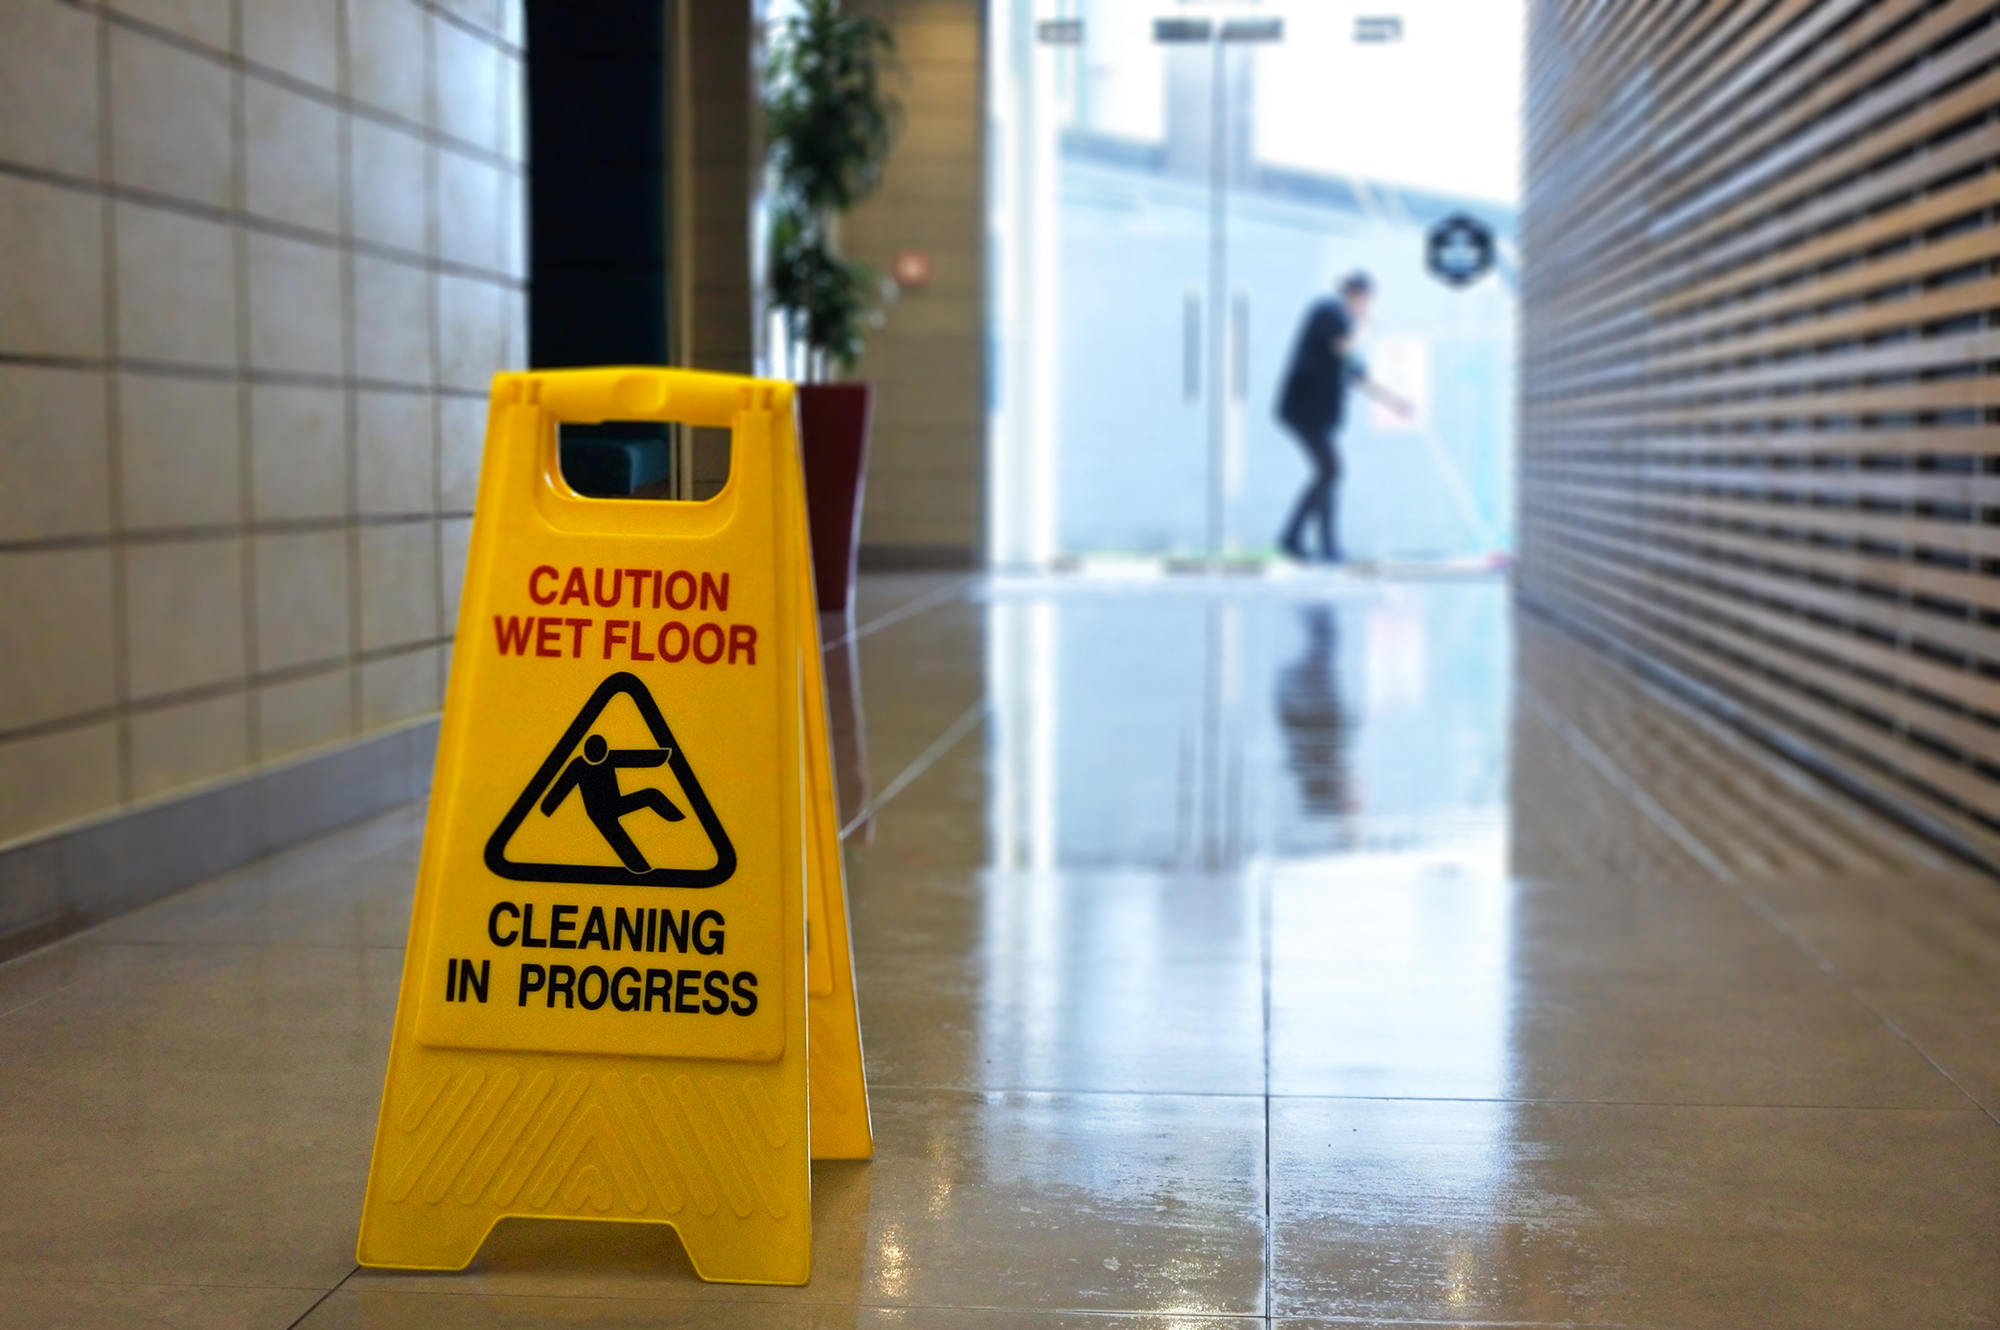 Claiming for slips and falls on wet floors